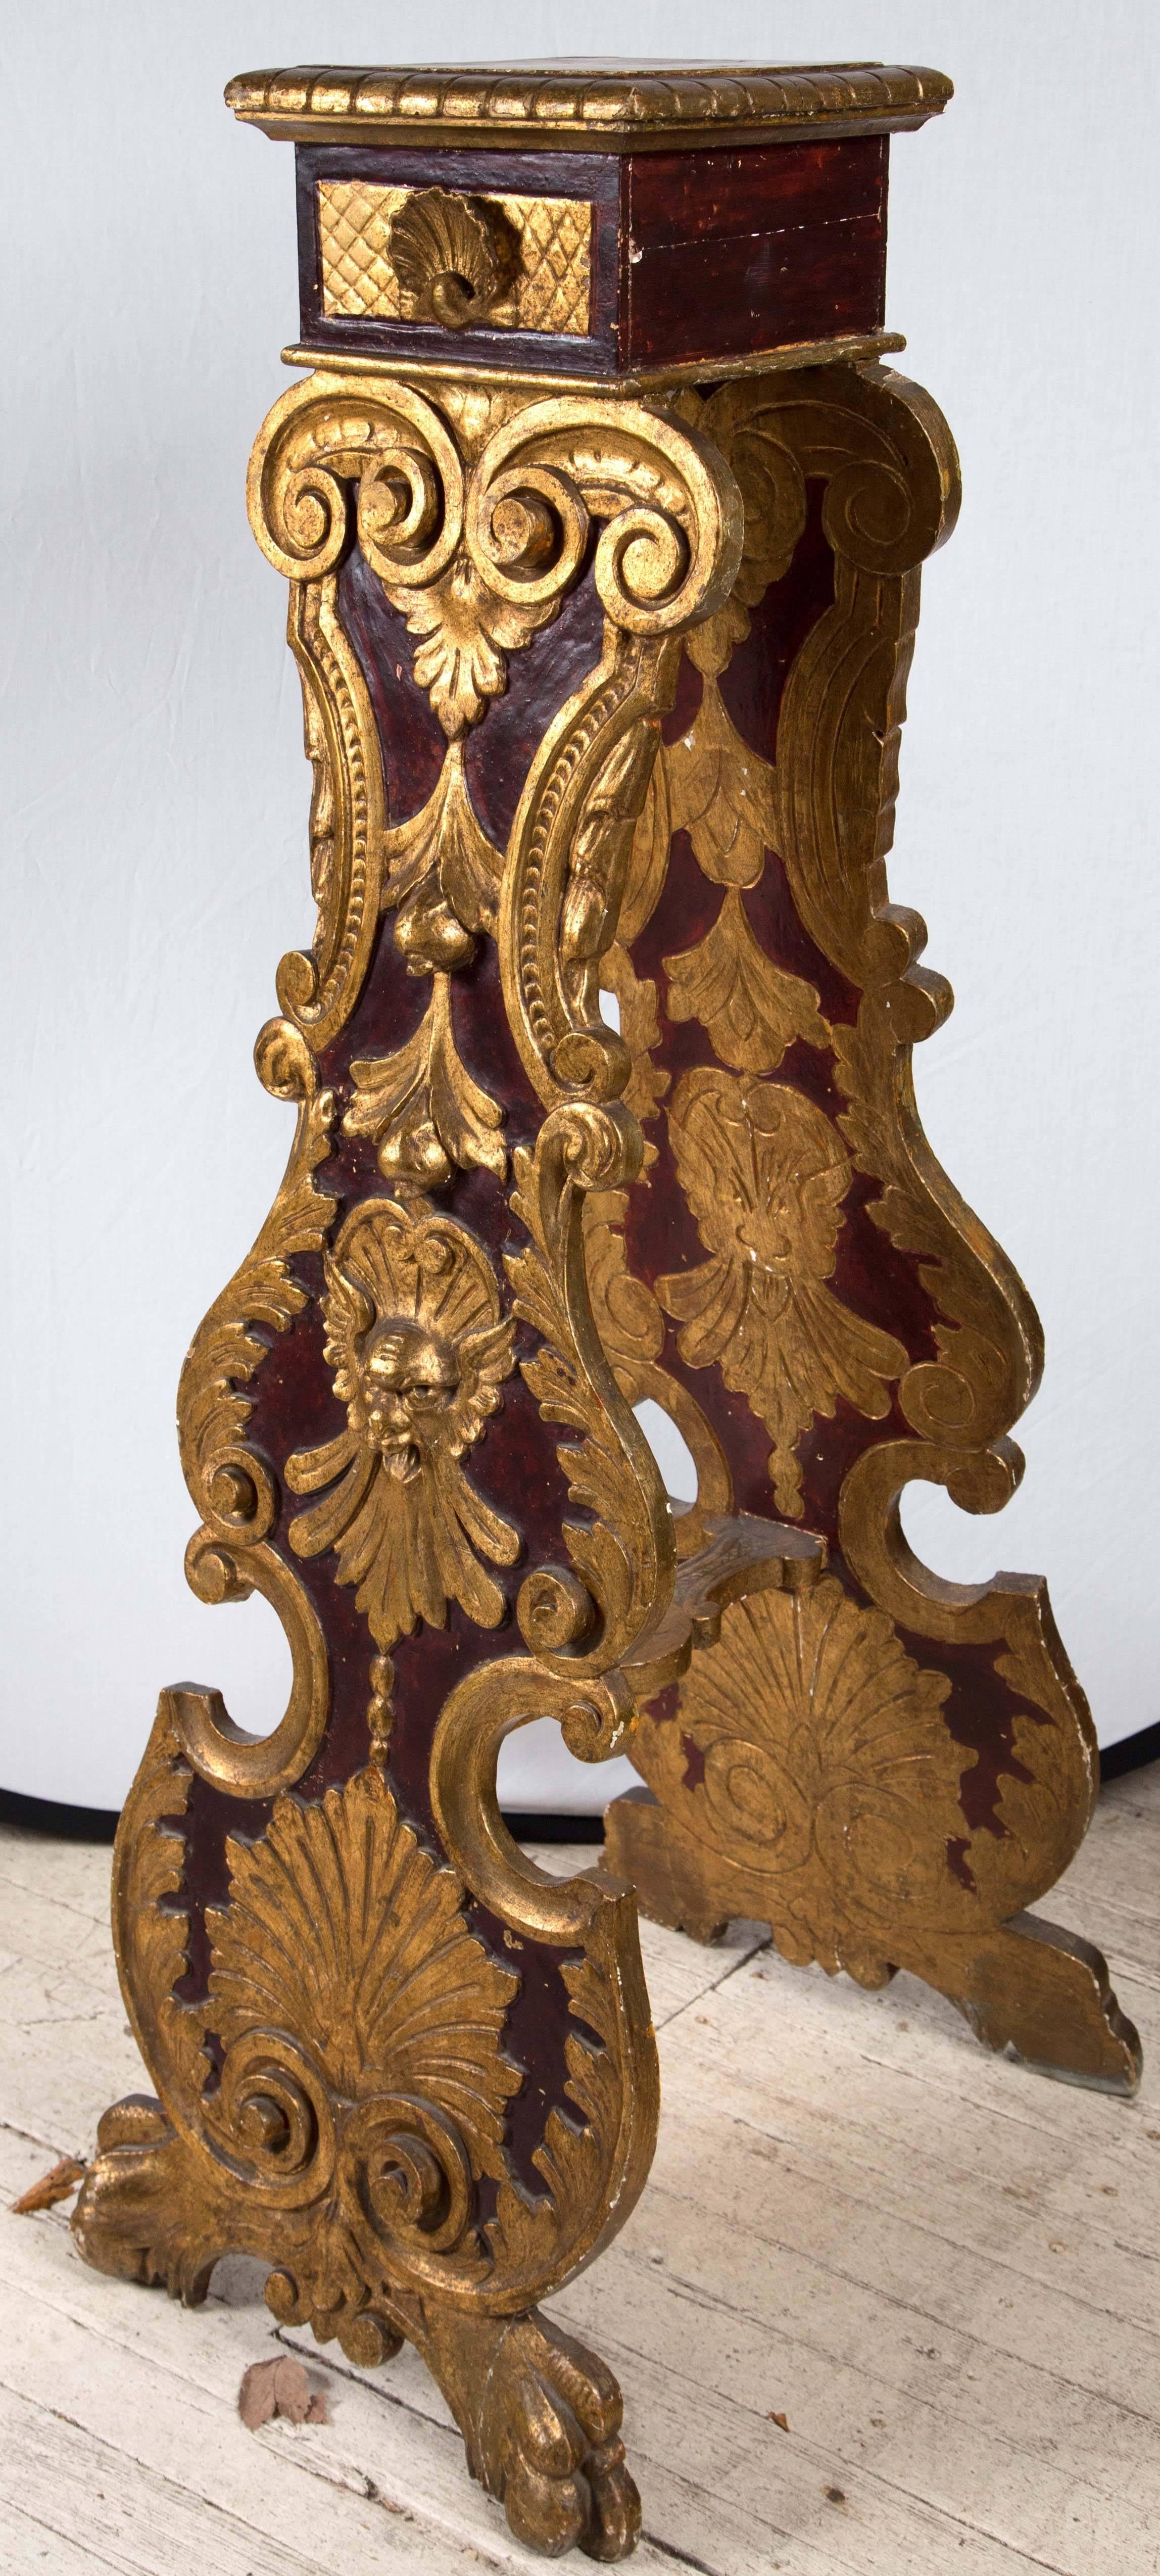 A splayed leg pedestal or plant stand painted in dark red faux bois and with gilded hand carvings with masks, leaf designs, scrolls, shells and gilt feet.
The back sides of each 